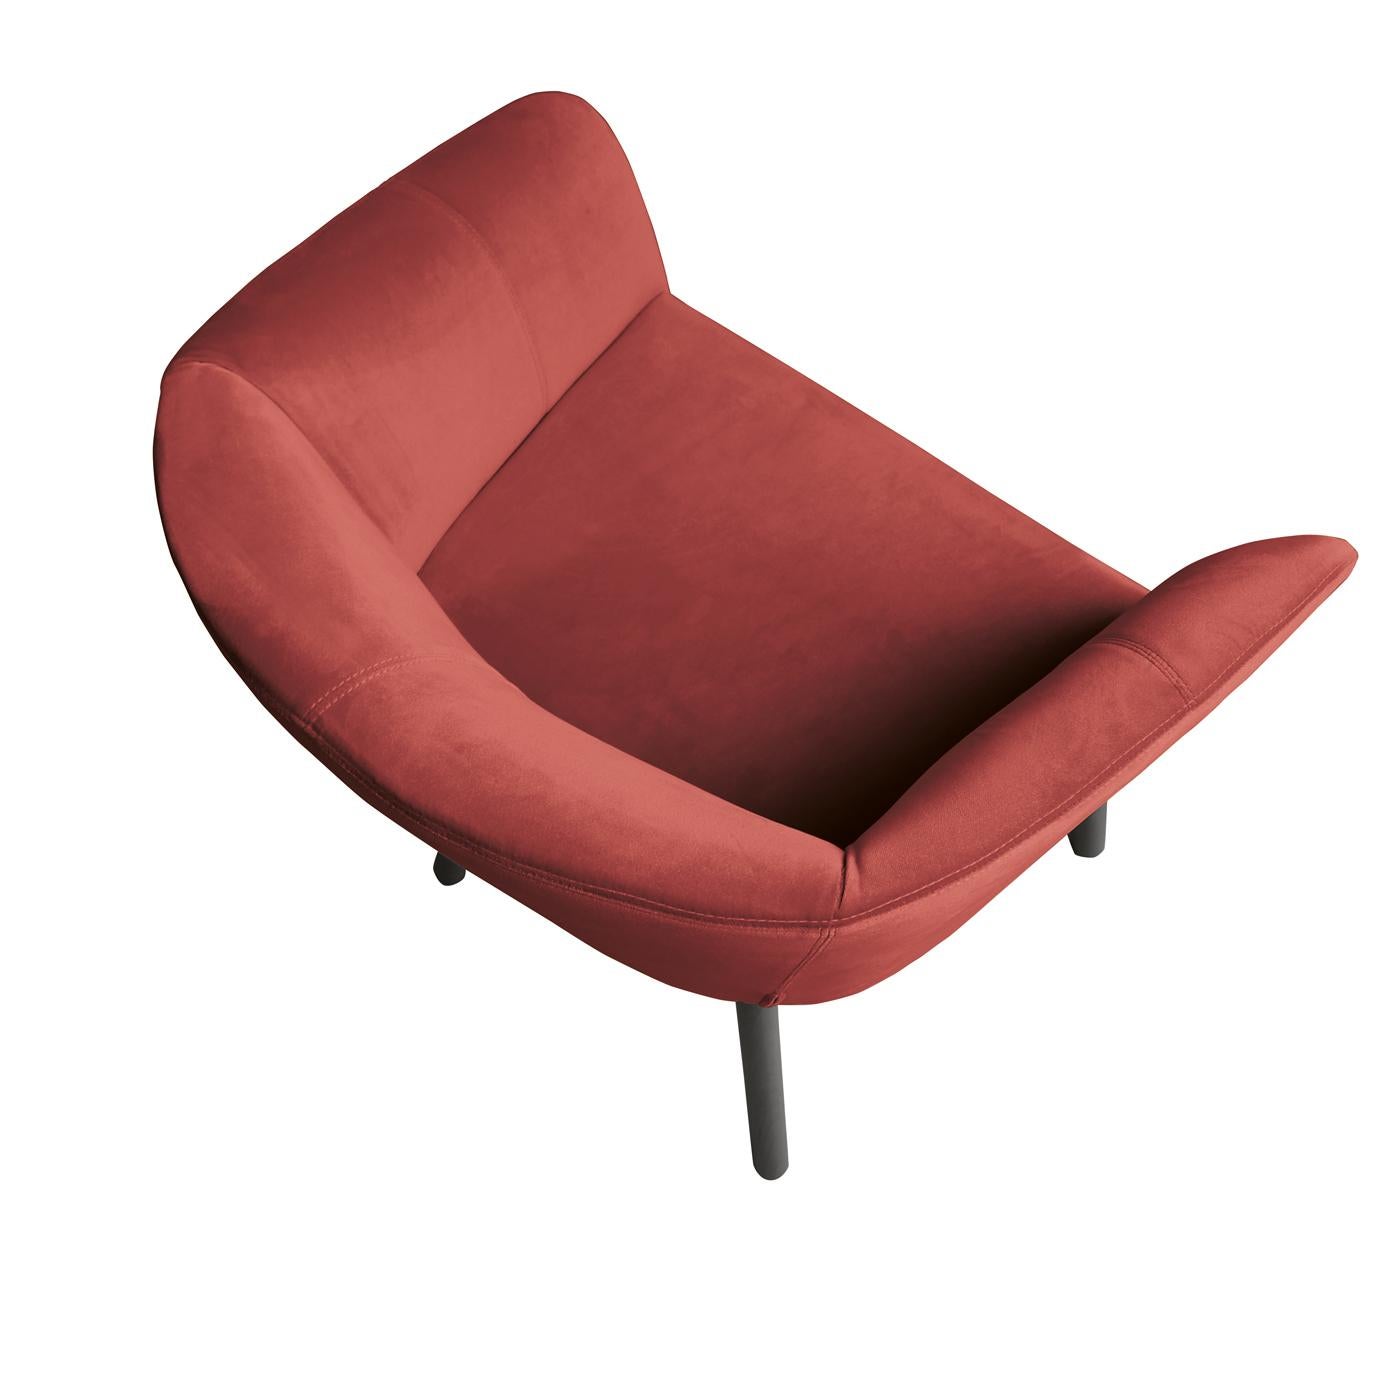 Balù Red Chair by Emilio Nanni In New Condition For Sale In Milan, IT